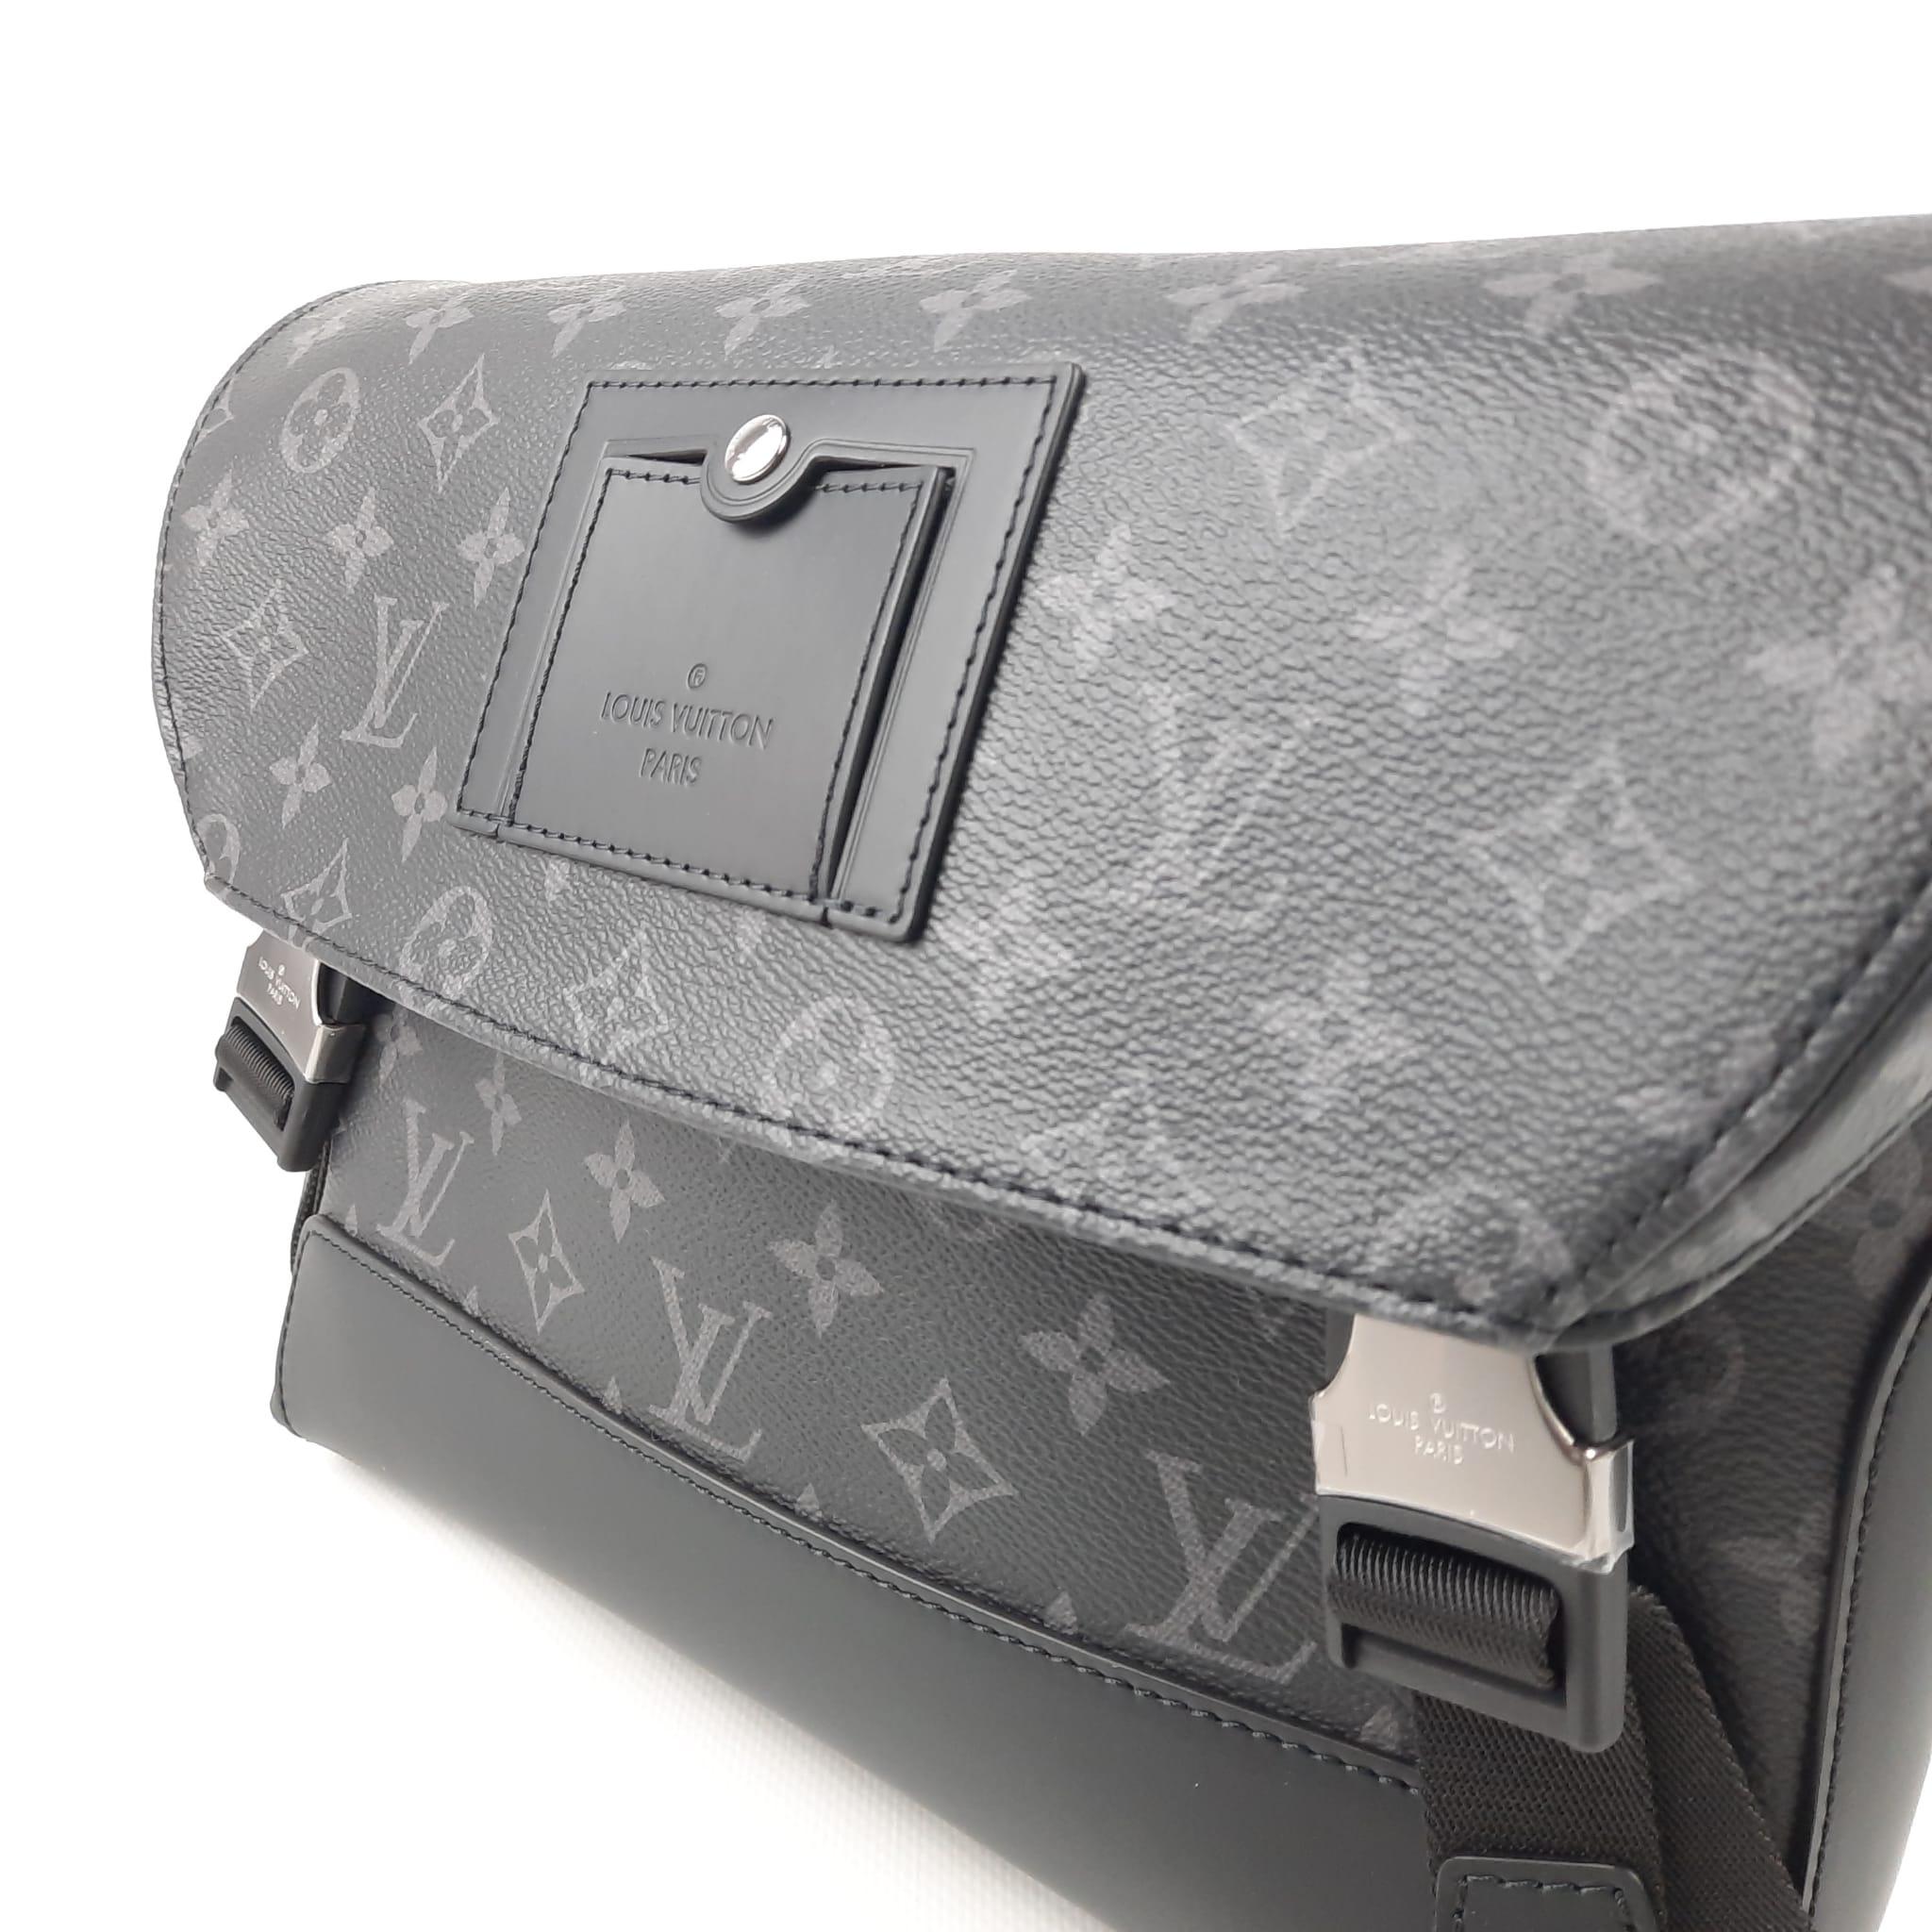 Louis Vuitton Messenger Pm Voyager - For Sale on 1stDibs